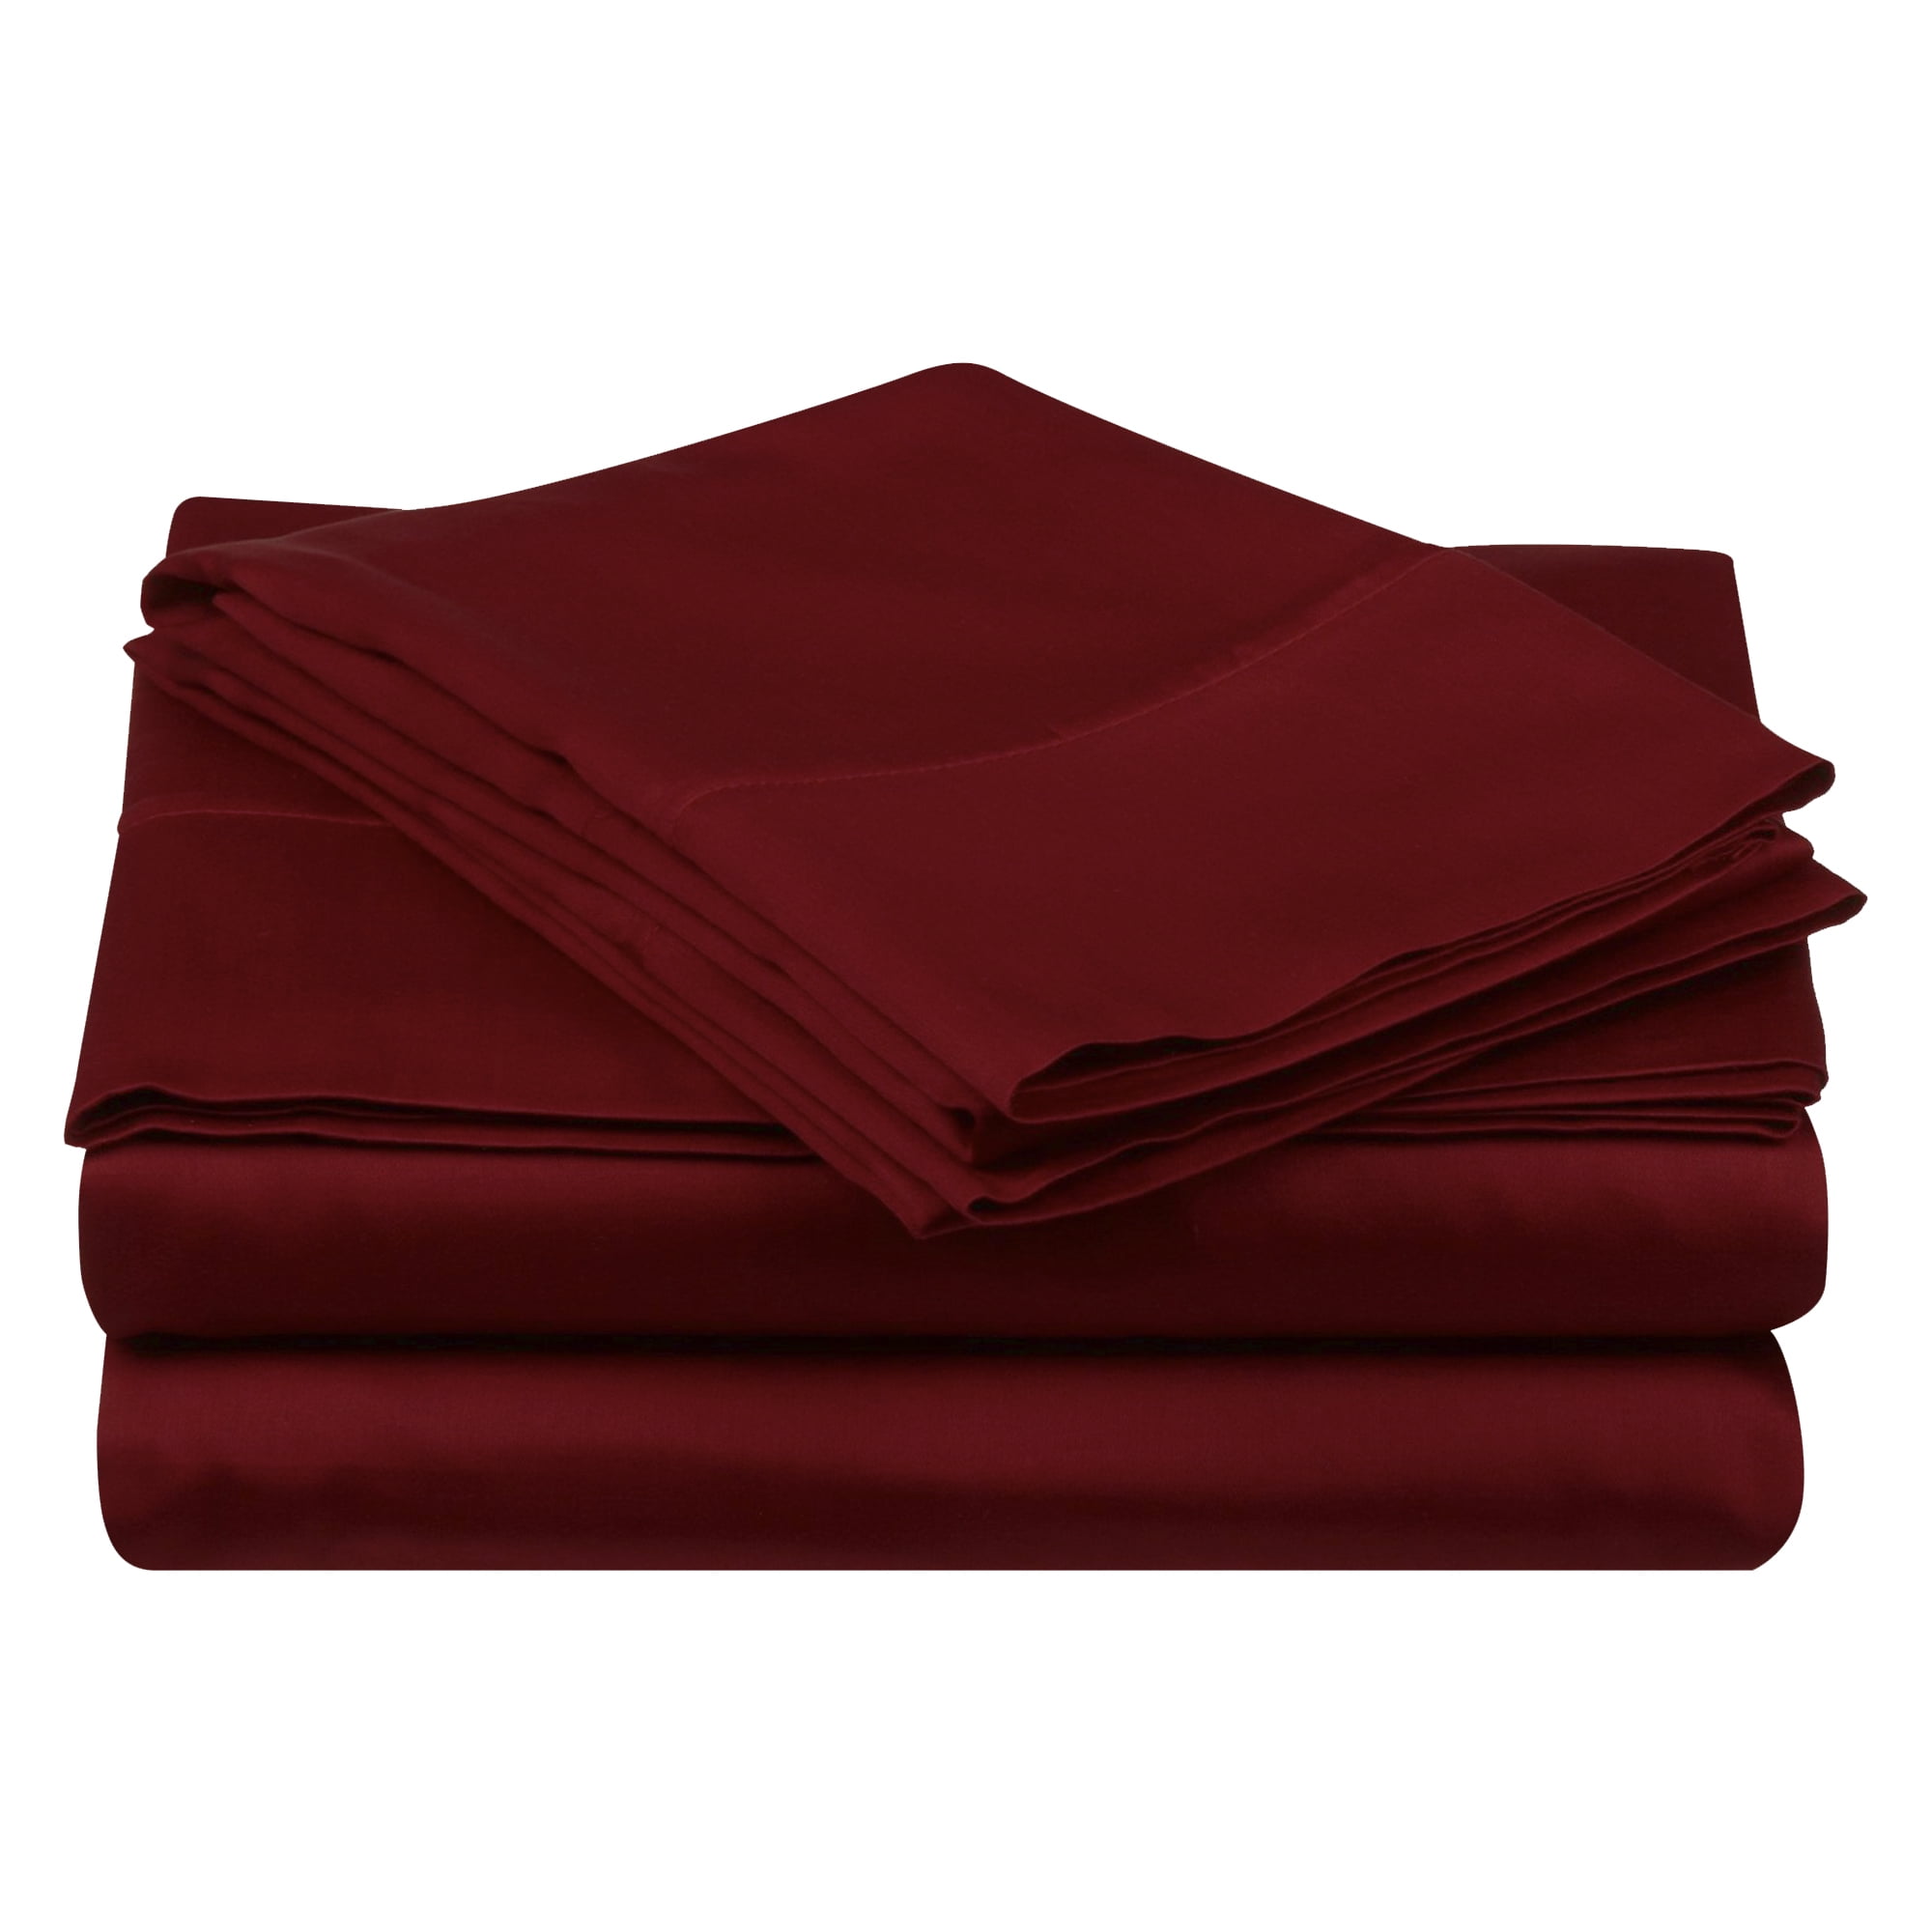 400TC FLAT SHEET 100% EGYPTIAN COTTON HOTEL QUALITY LUXURY TOP SHEETS ALL SIZES 